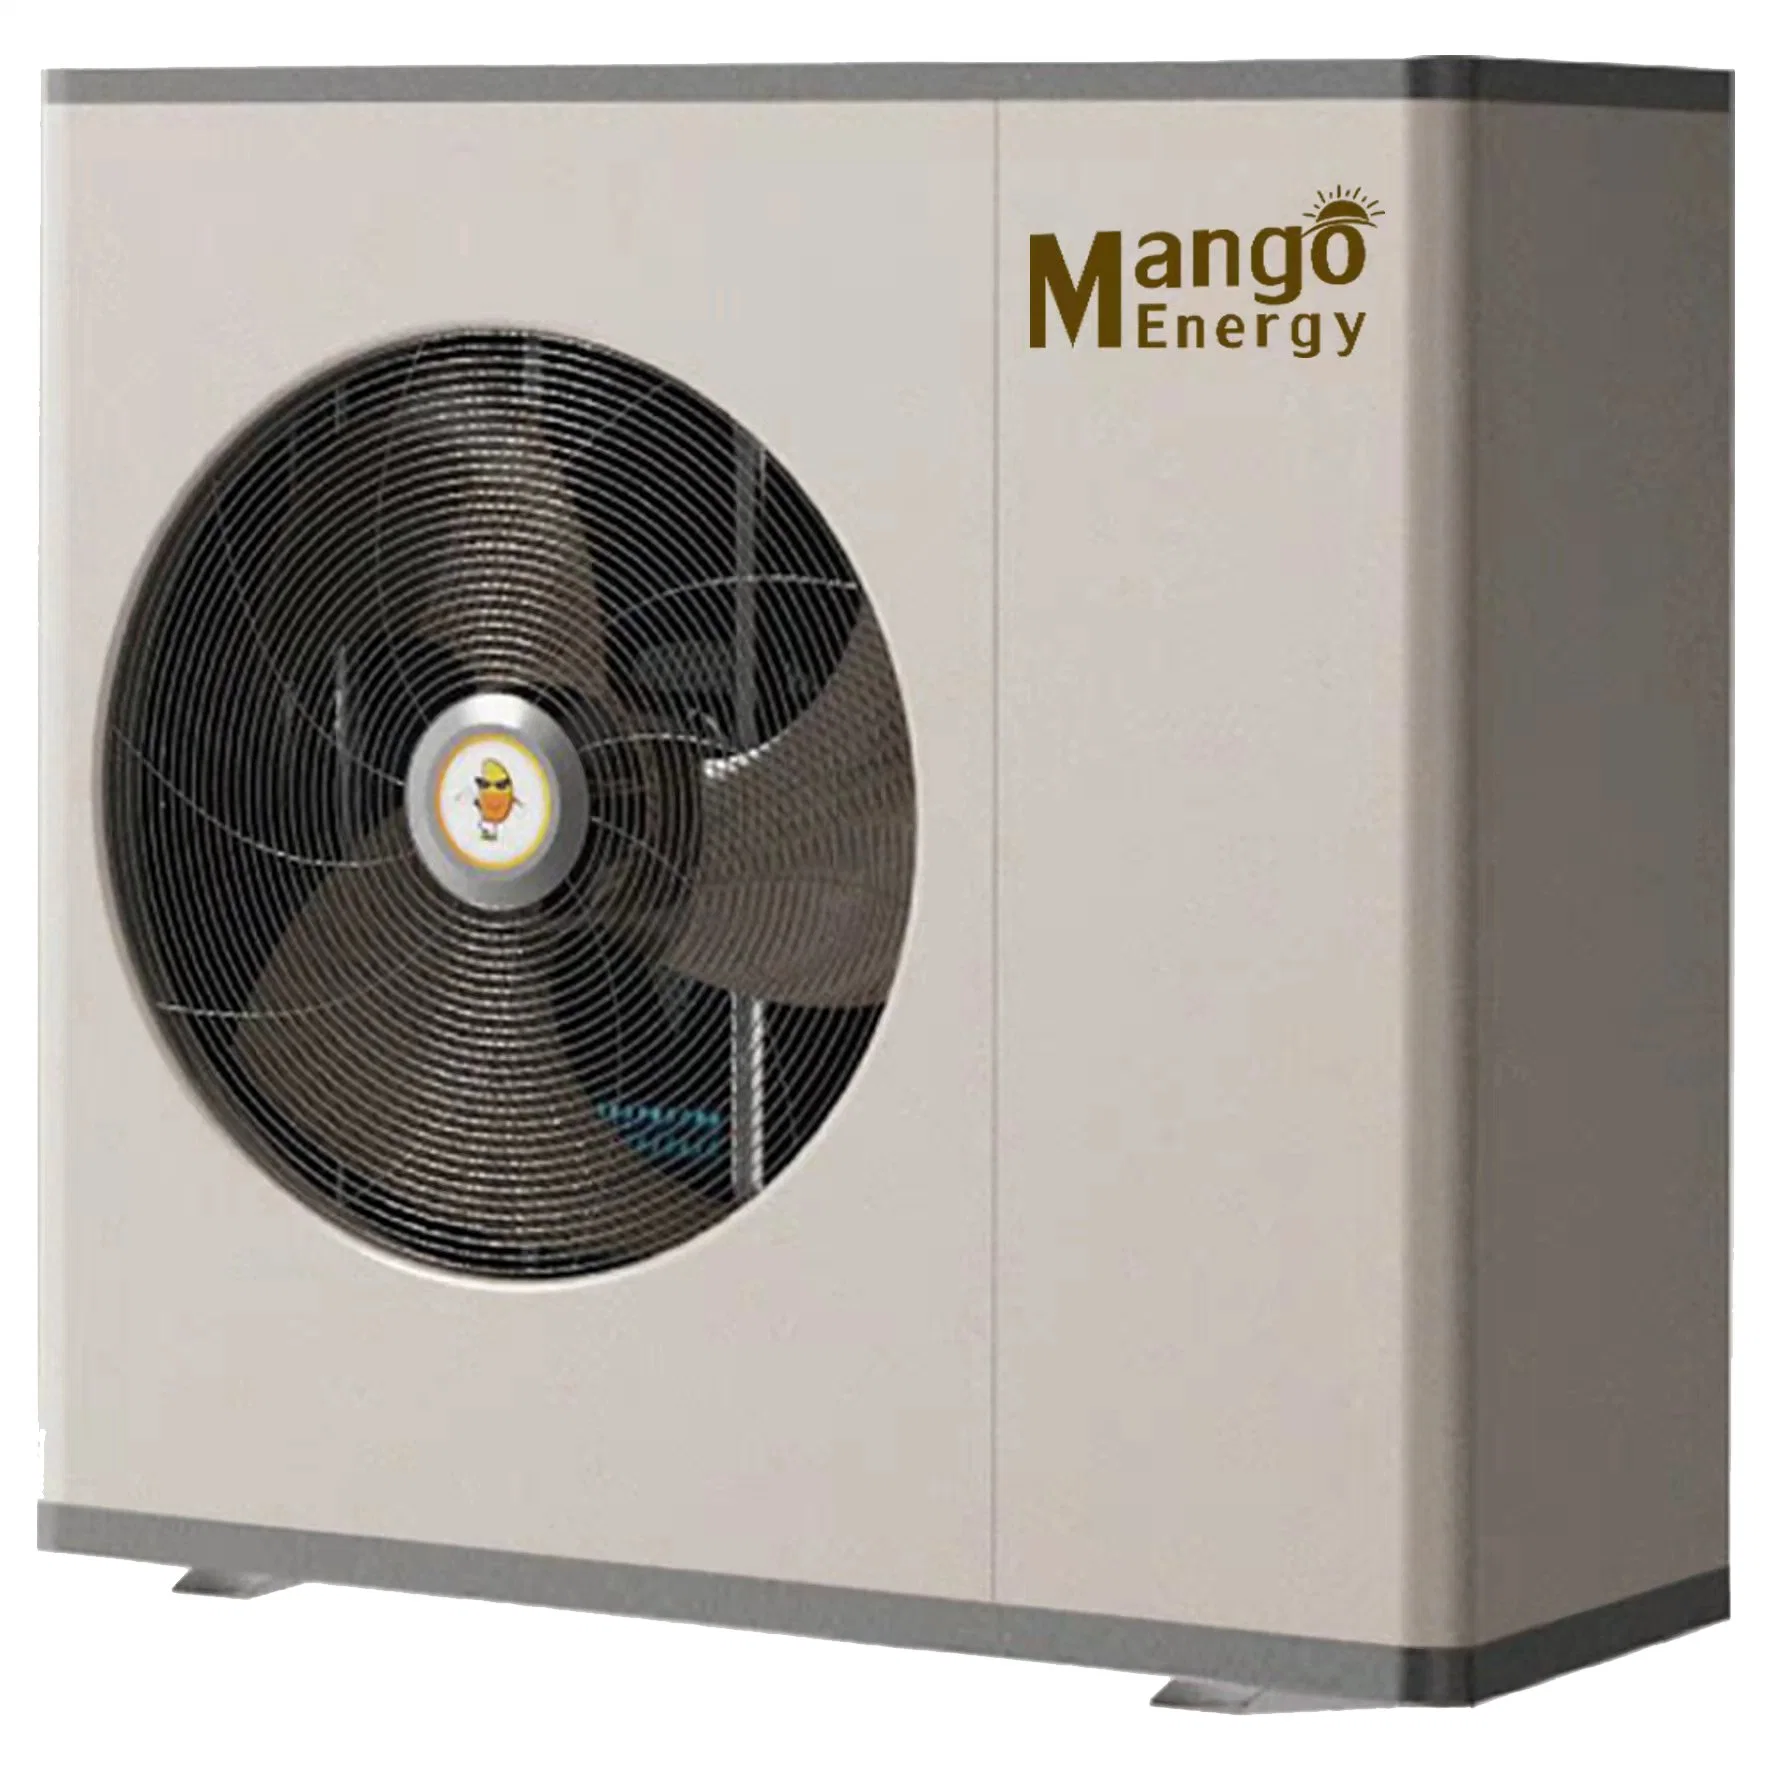 Super Quite Air Conditioning DC Inverter Heat Pump Heating Cooling System for Fan Coils